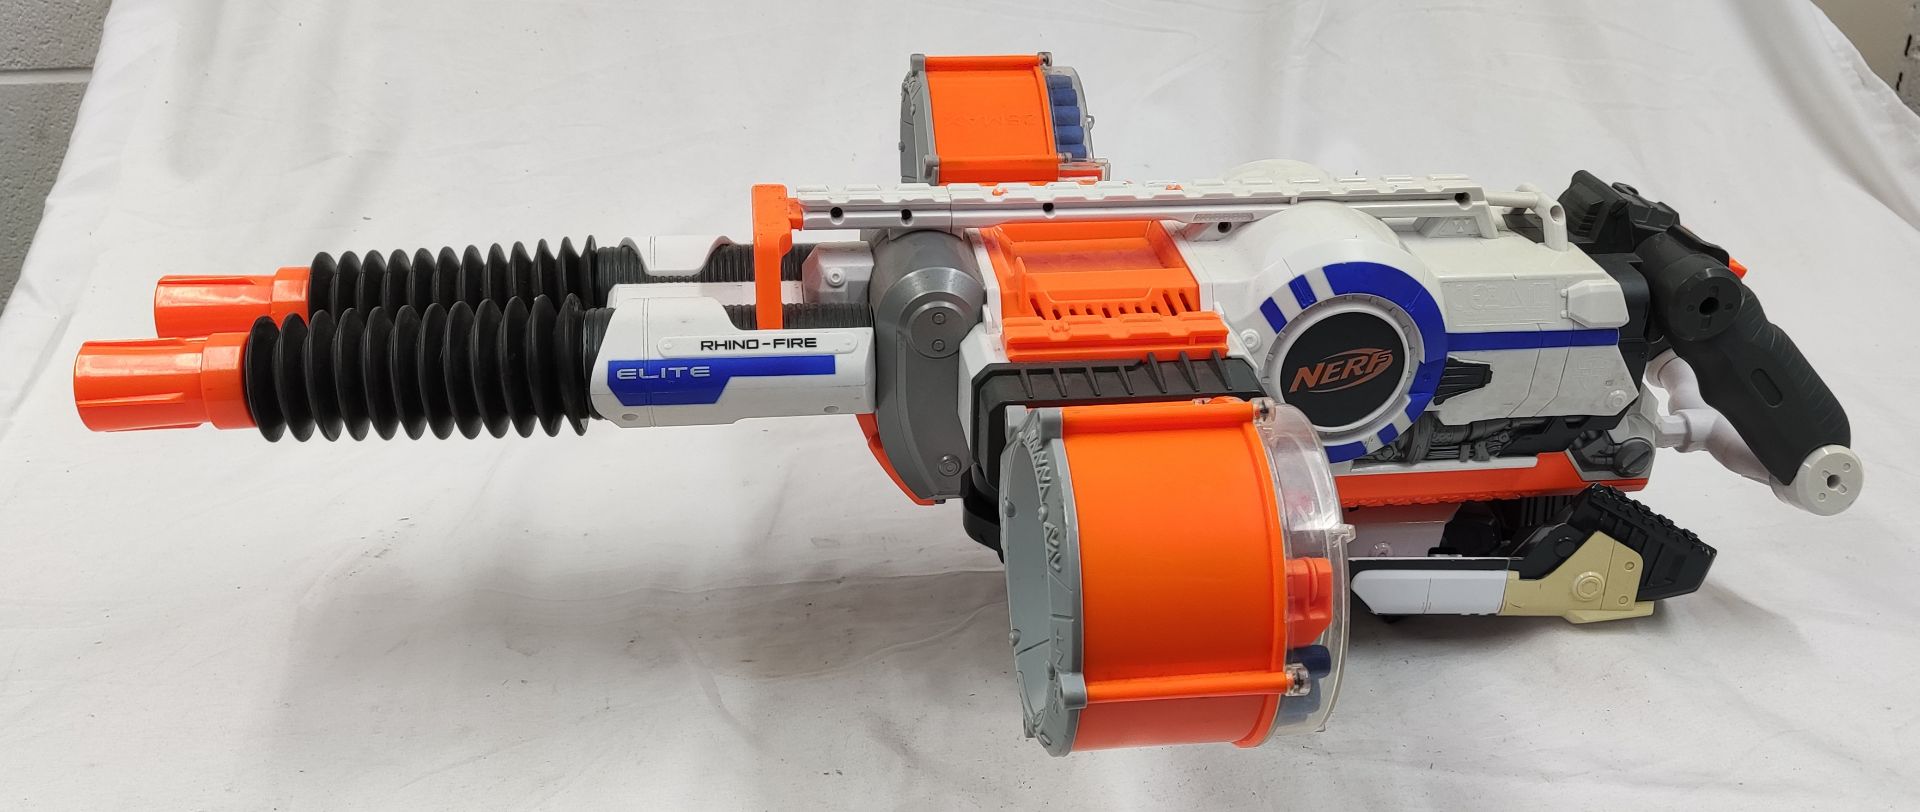 1 x Nerf Rhino-Fire Electric Nerf Gun with Moving Barrels - Used - CL444 - NO VAT ON THE HAMMER - - Image 10 of 12